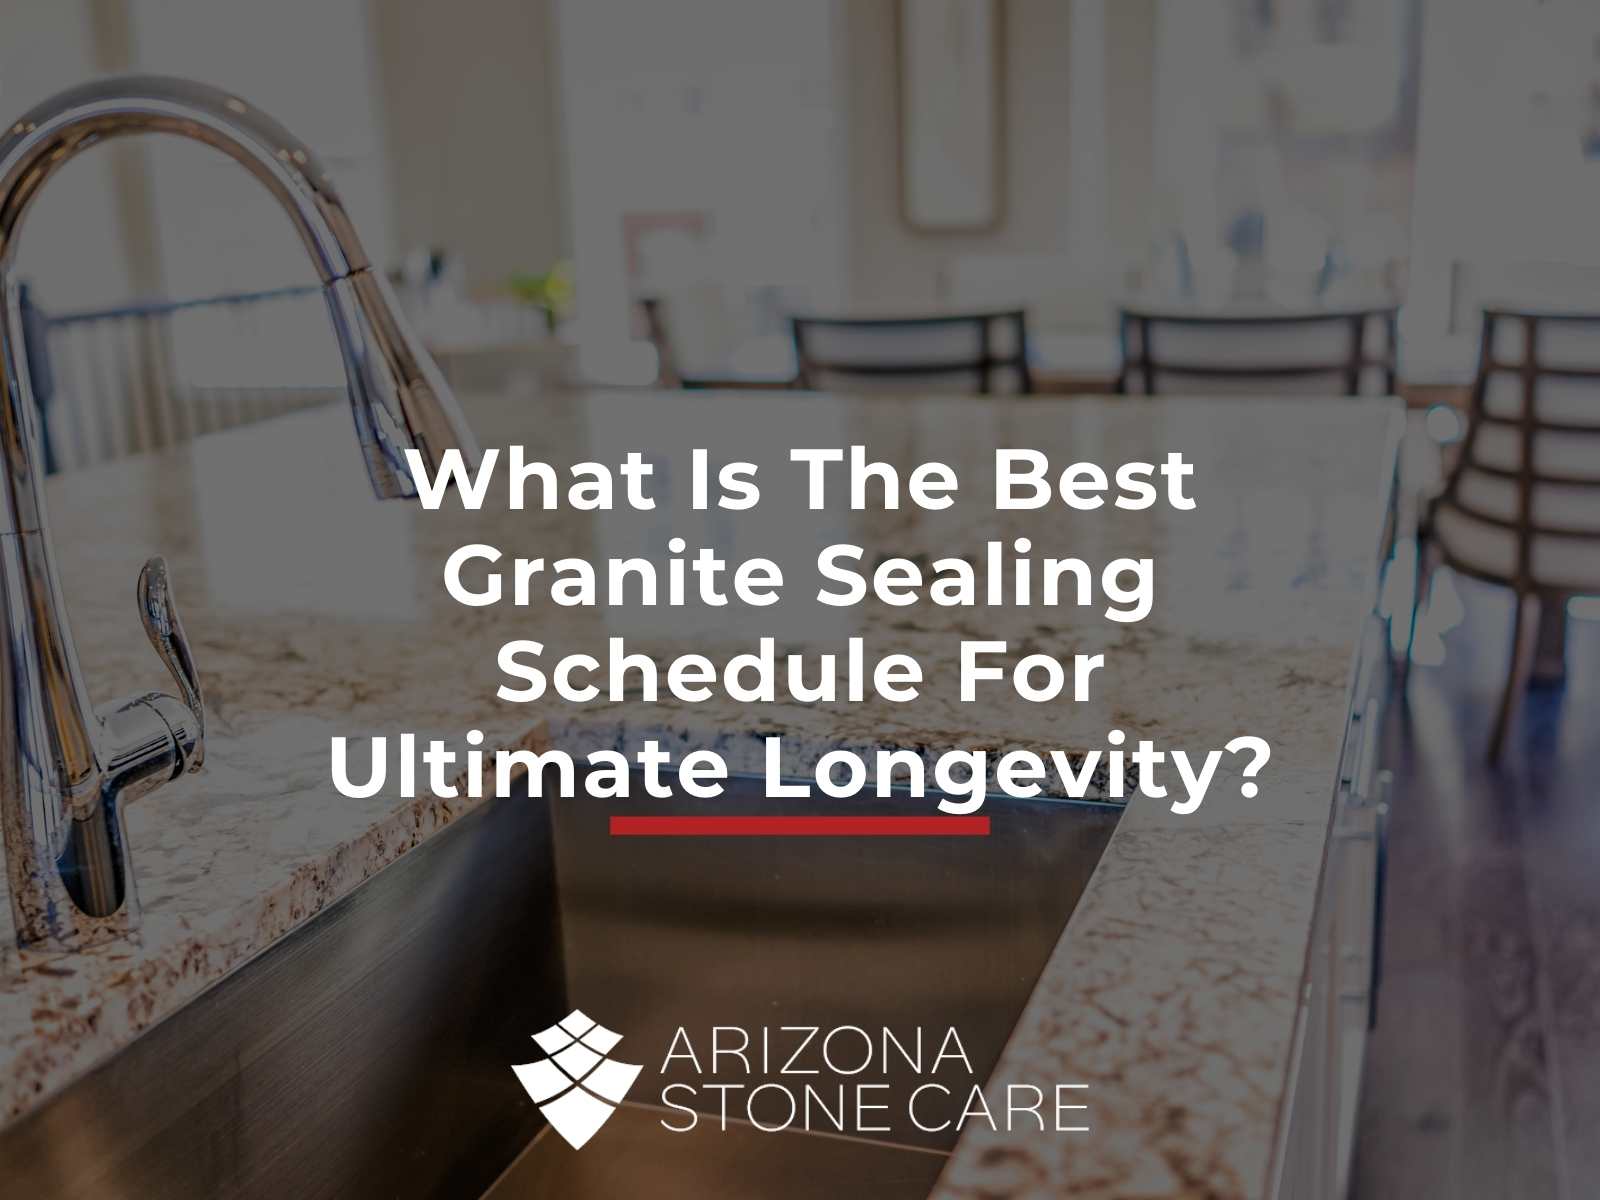 What Is The Best Granite Sealing Schedule For Ultimate Longevity?